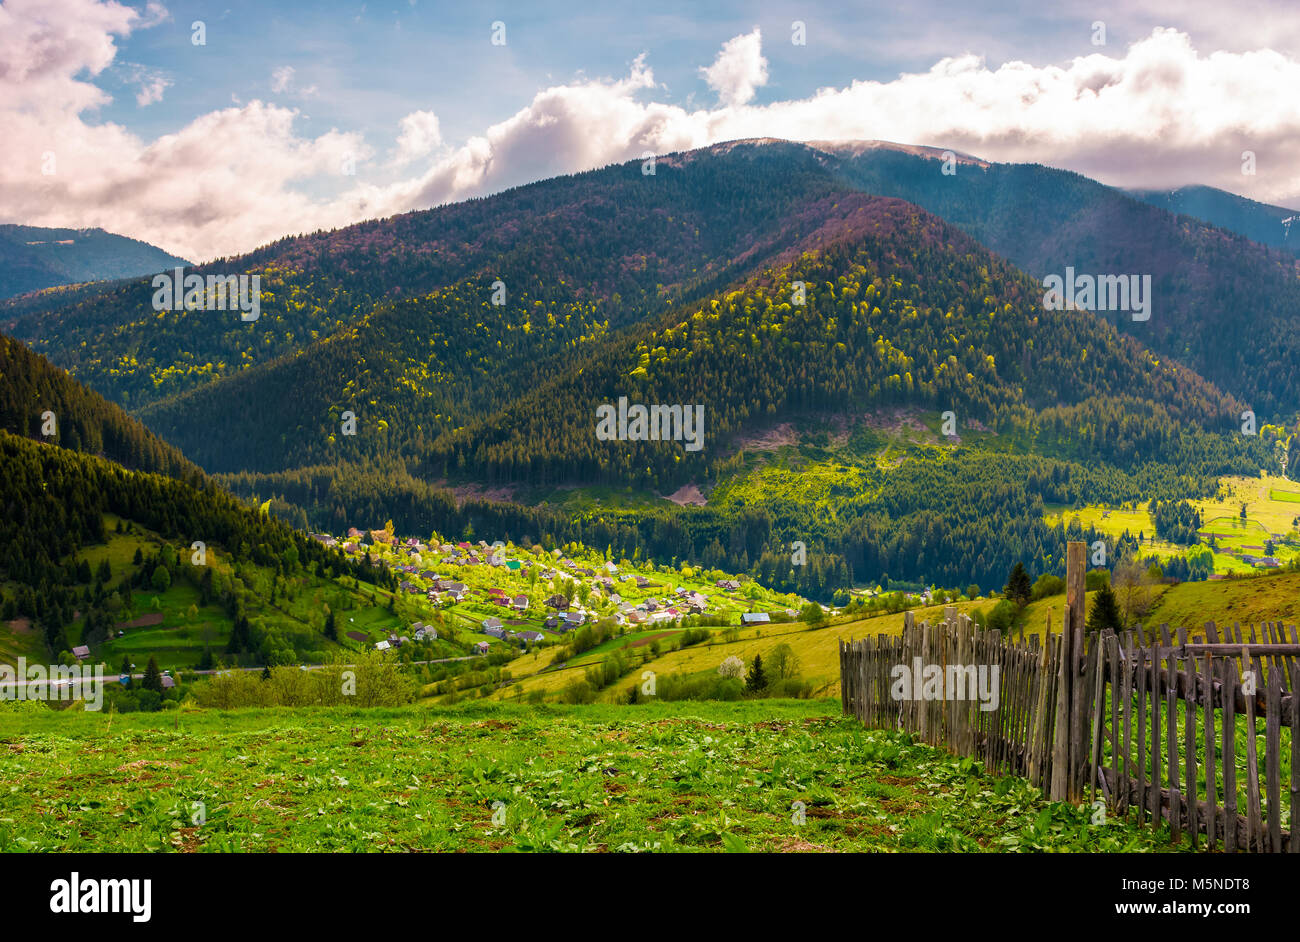 village in valley on a cloudy springtime day. fence on hillside above beautiful rural area Stock Photo